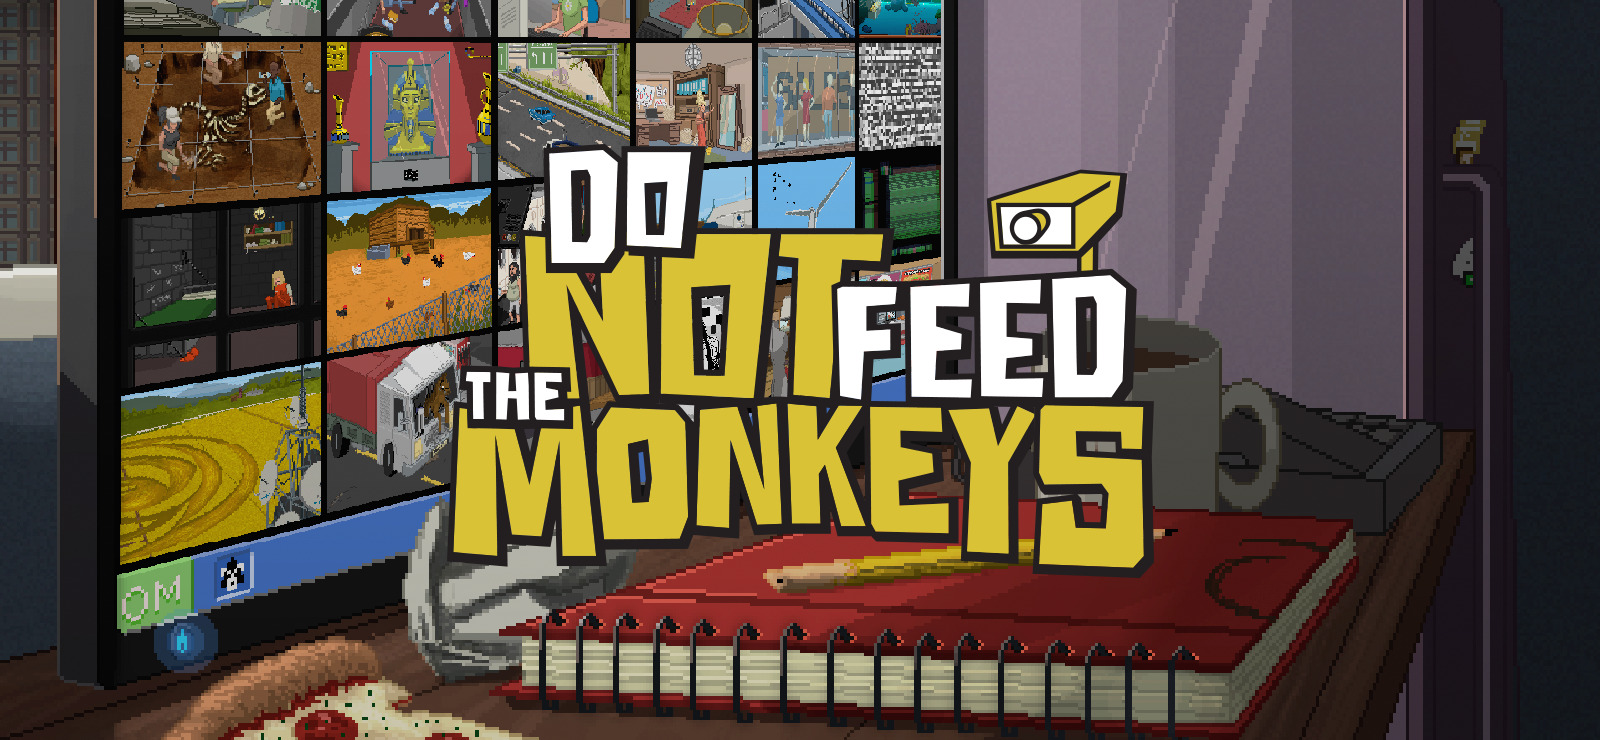 80% Do Not Feed the Monkeys on